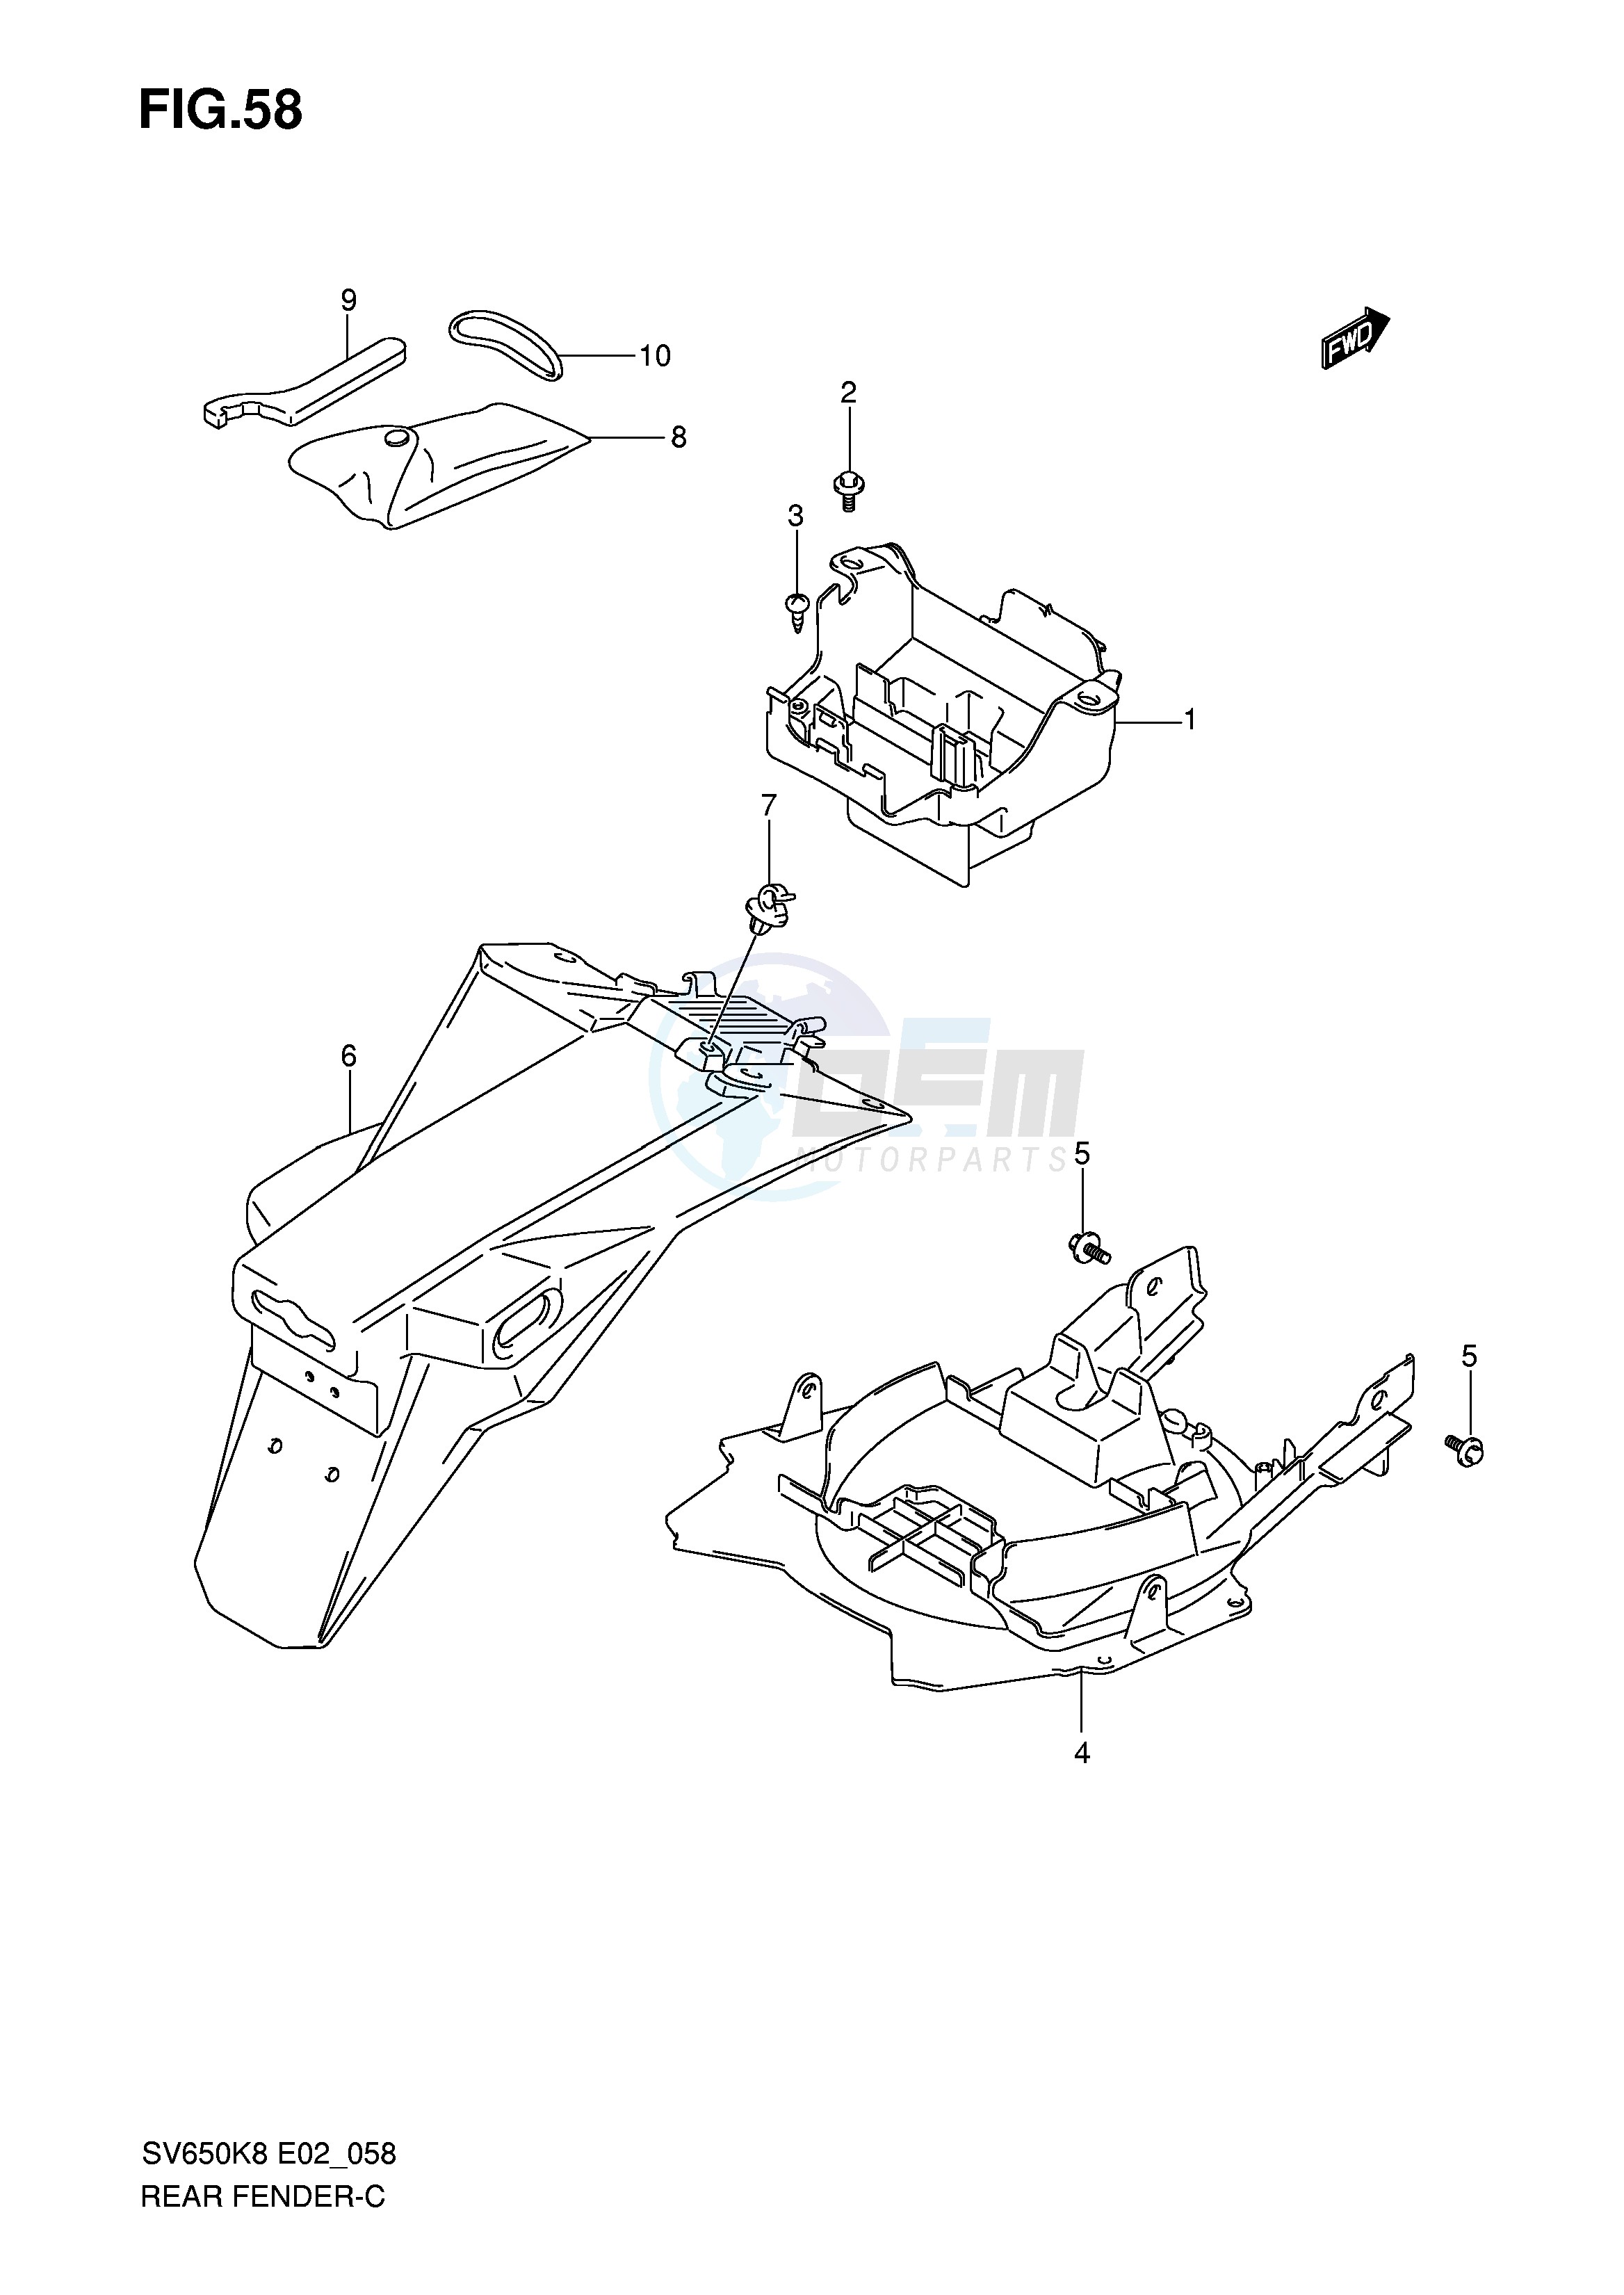 REAR FENDER (WITH ABS) blueprint